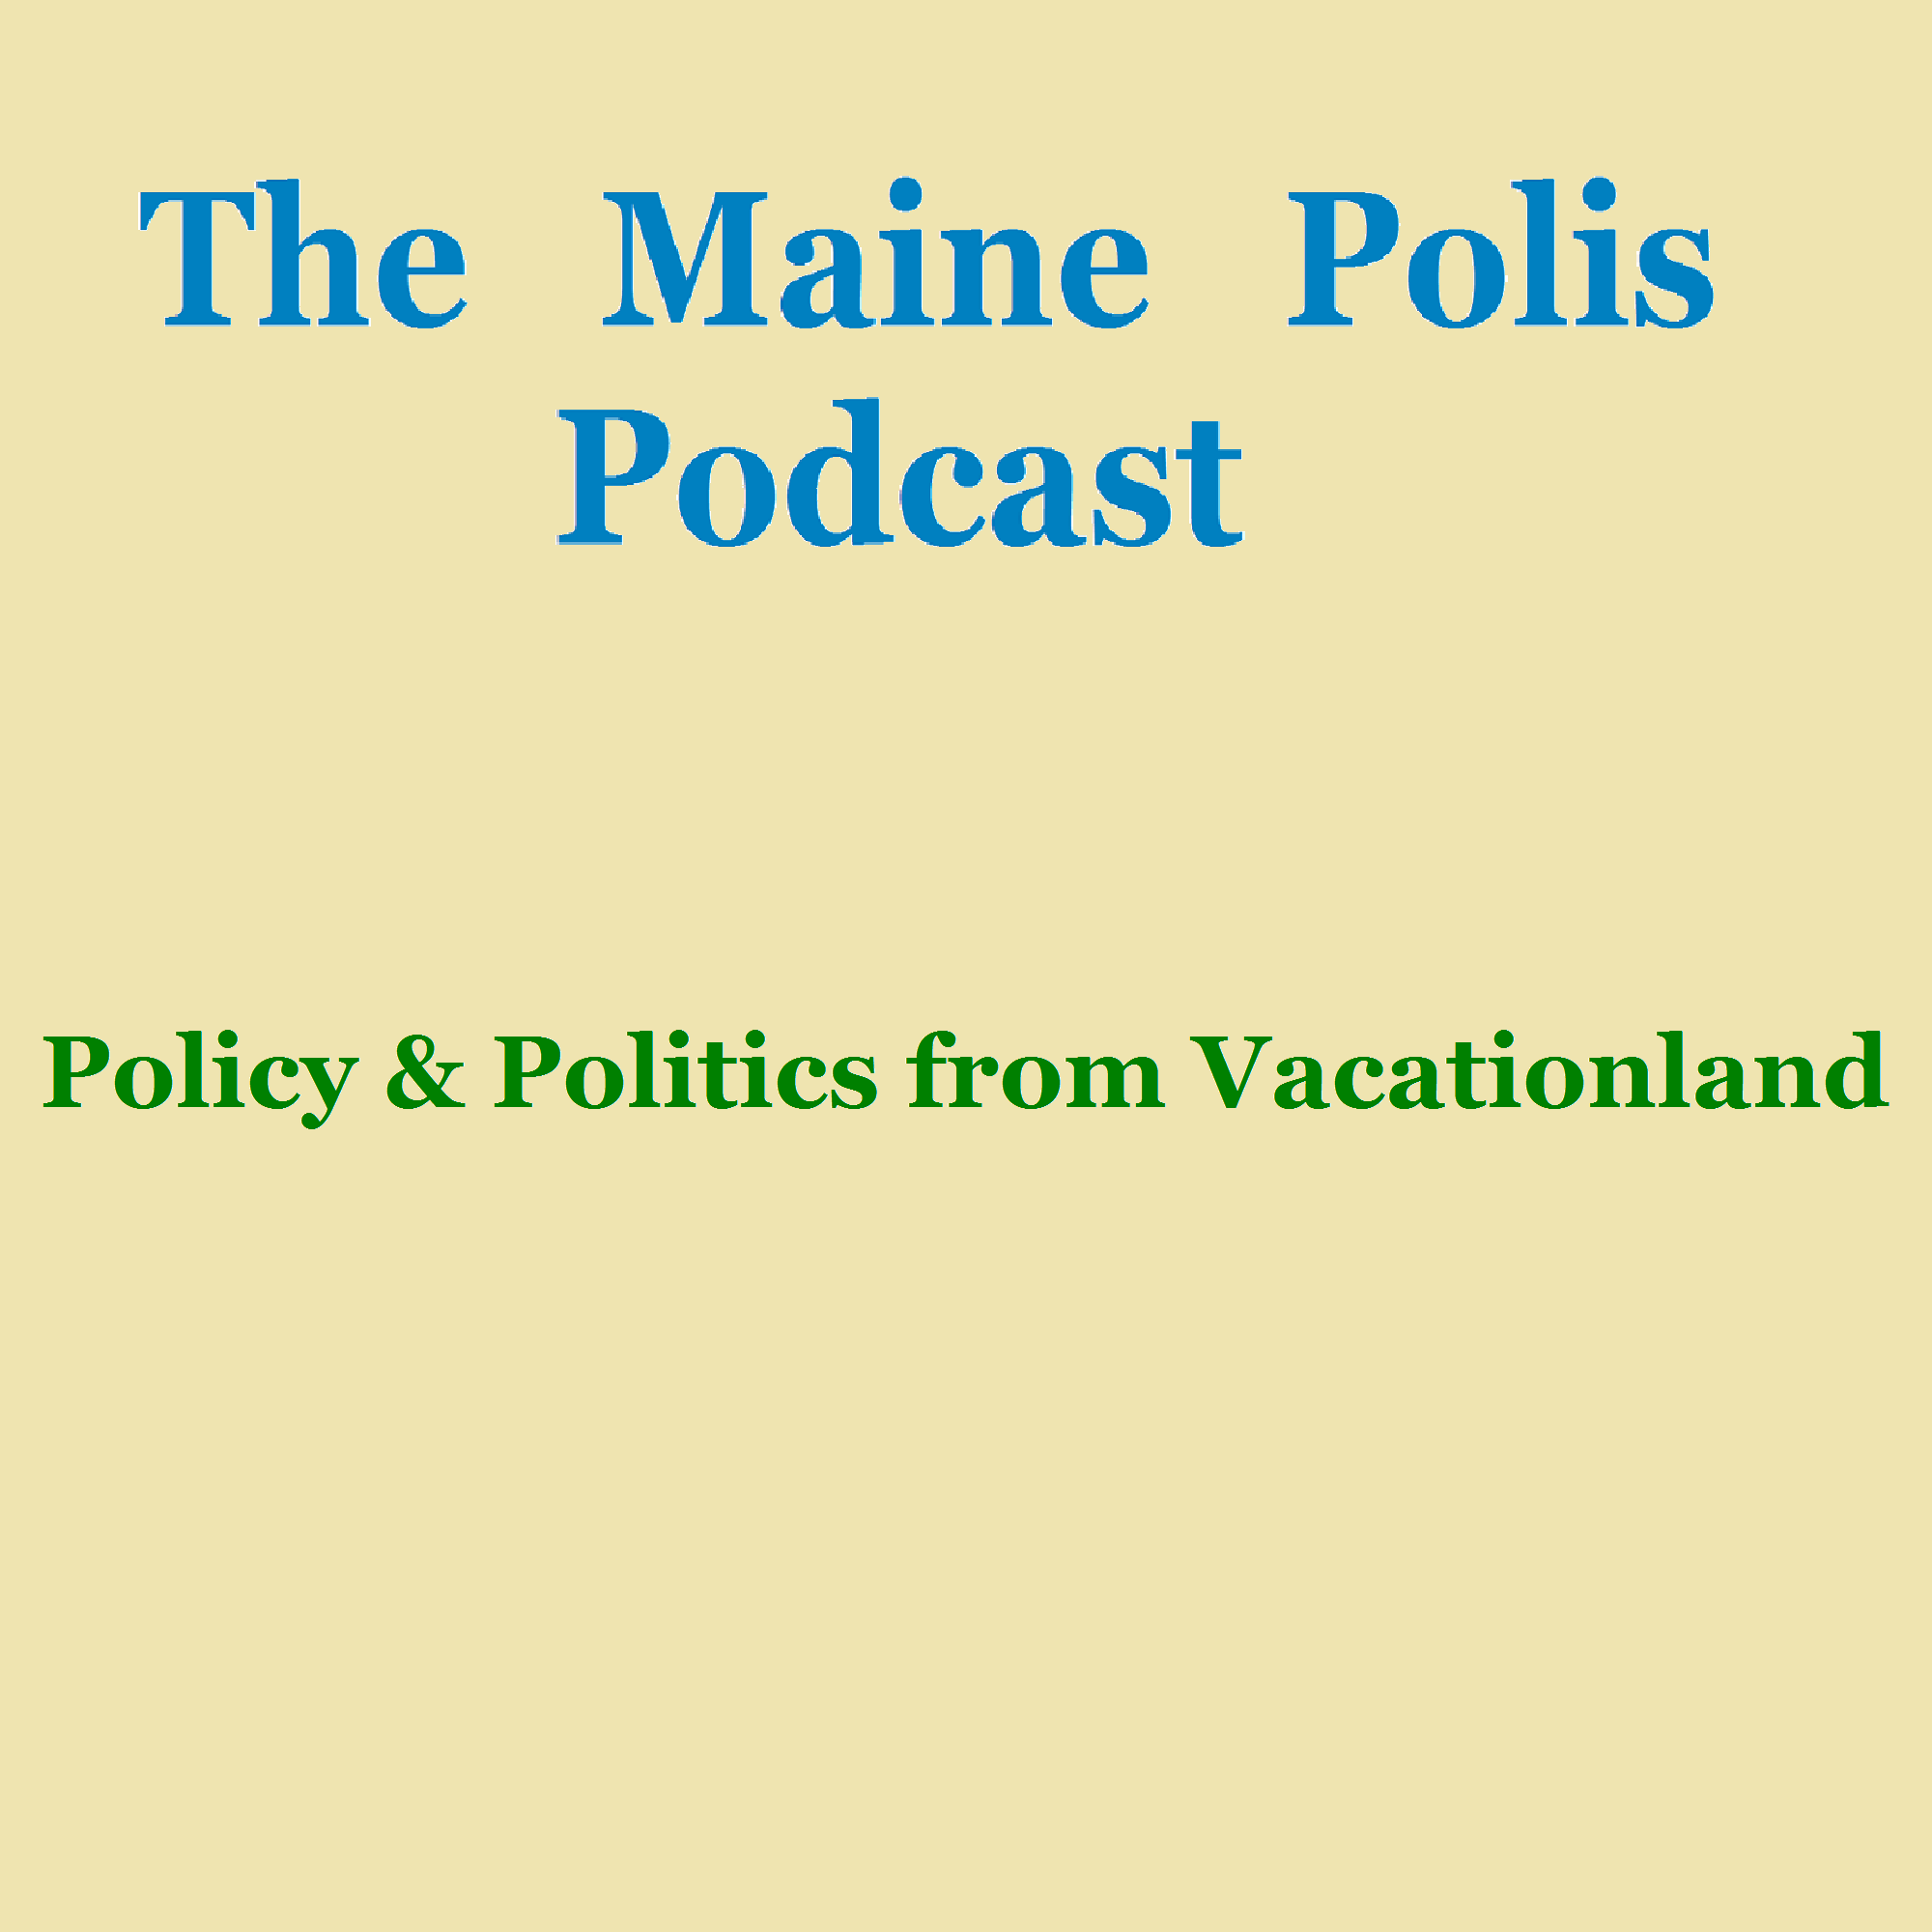 TMP Podcast #7 - Maine's Election Process Part I: The Municipal Players, Election Day & Absentee Voting